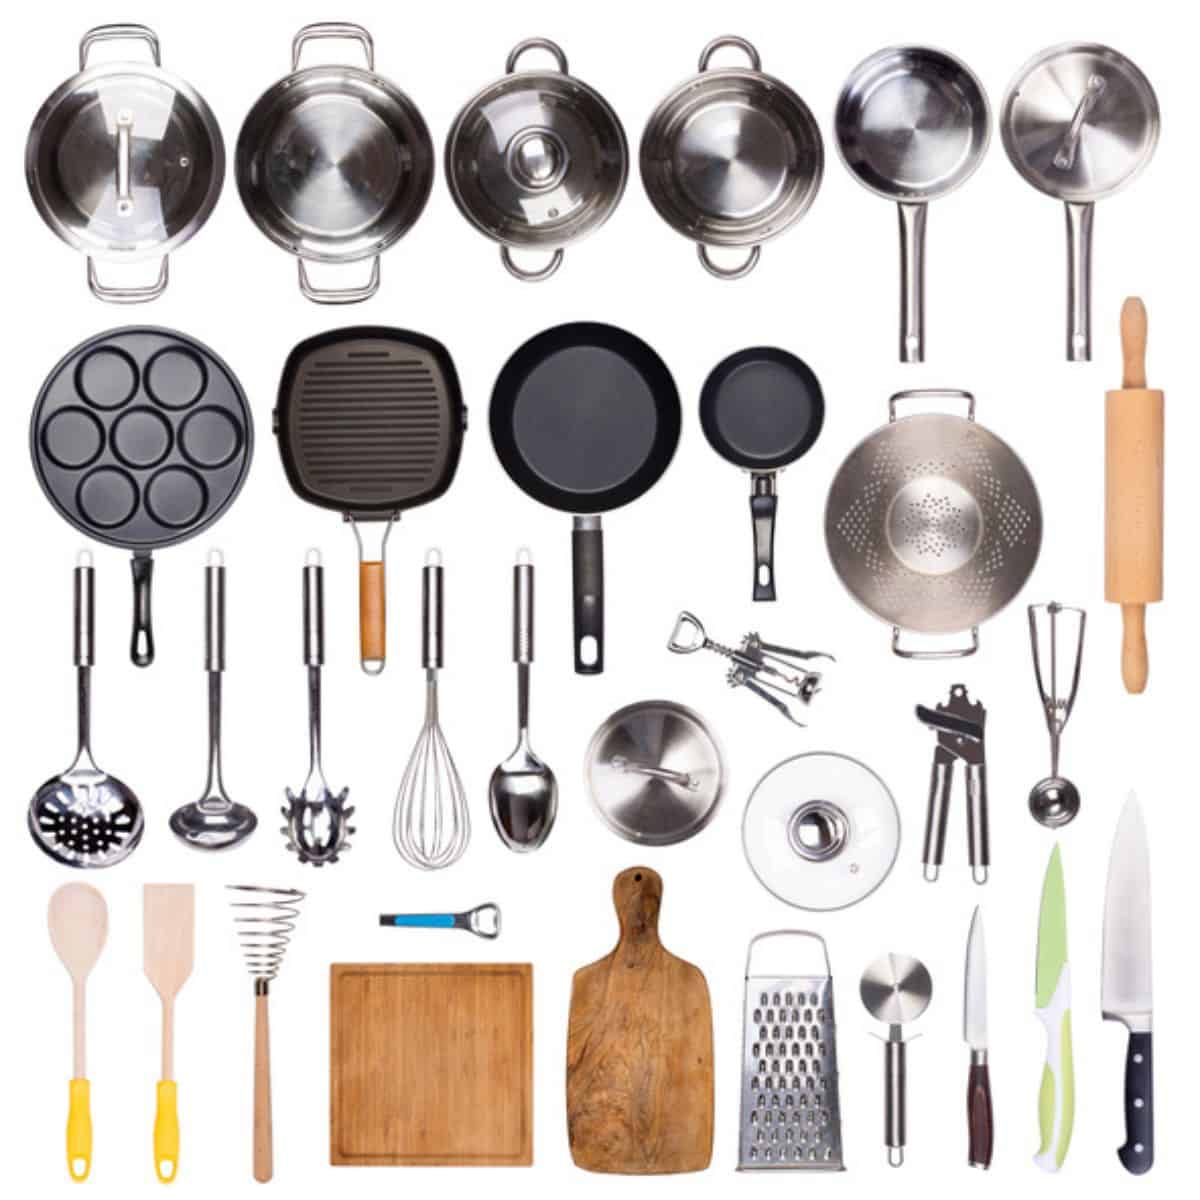 Beginners Guide to Cooking Utensils 